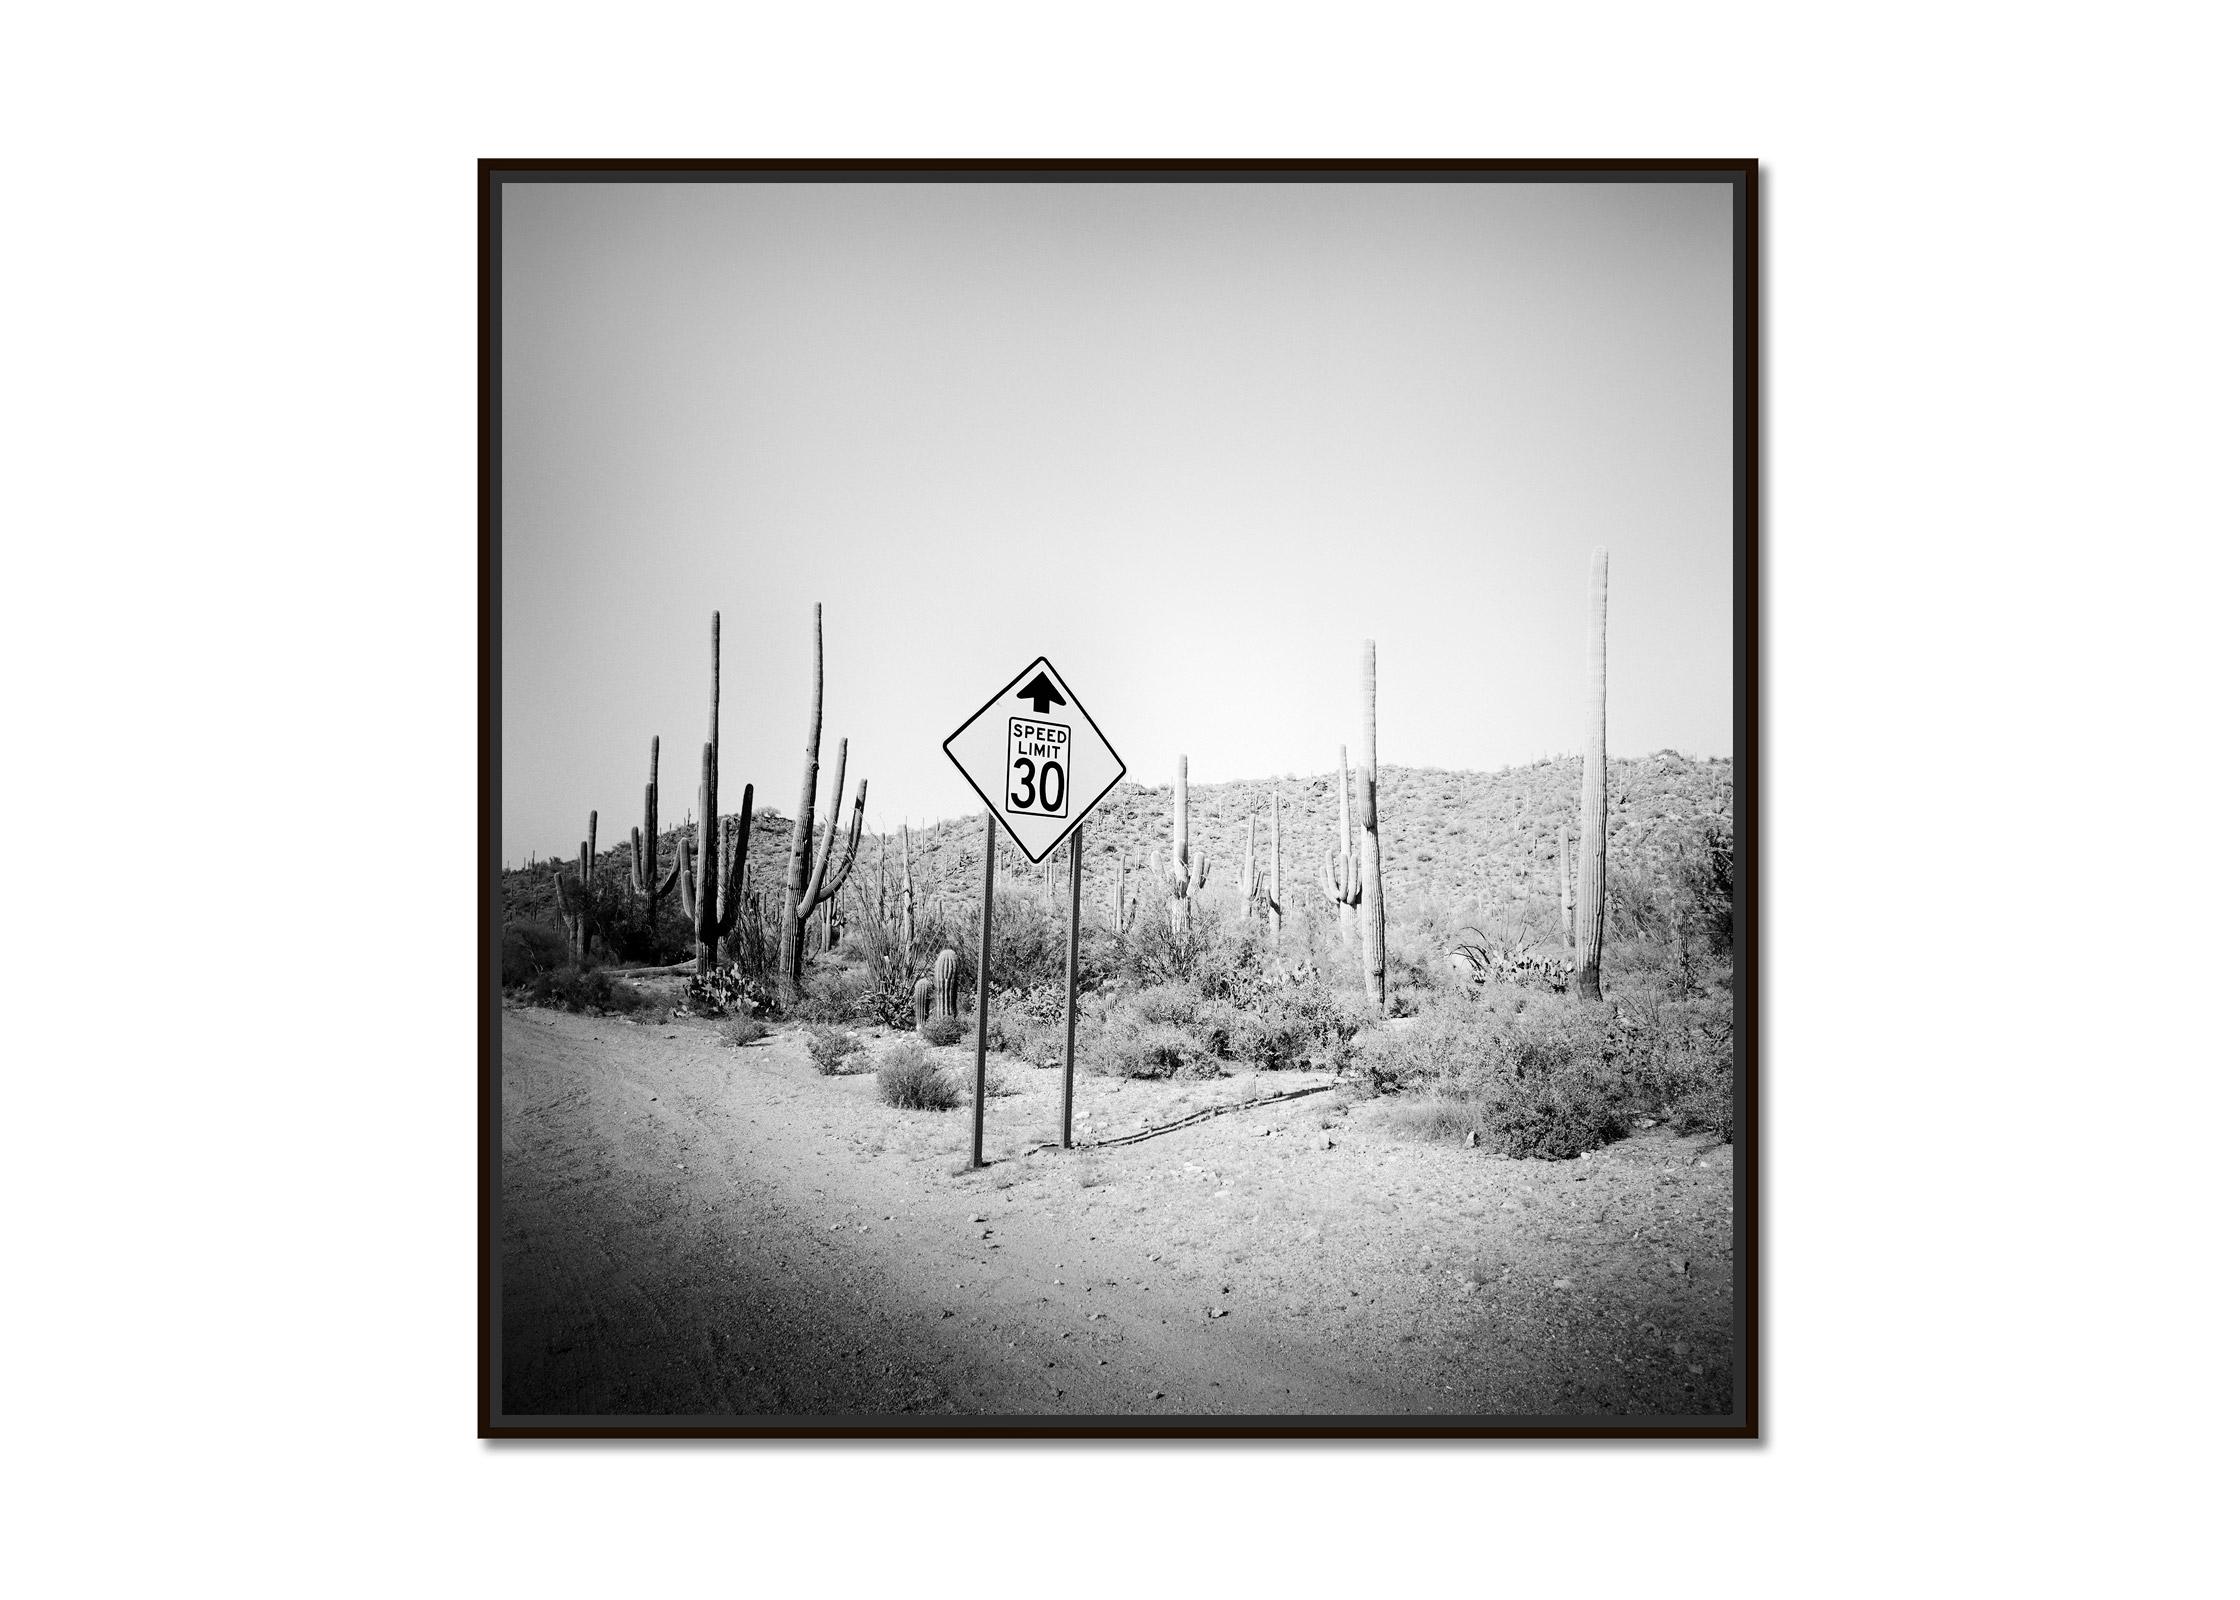 Speed Limit, Desert, Cactus, Arizona, black and white art landscape photography - Photograph by Gerald Berghammer